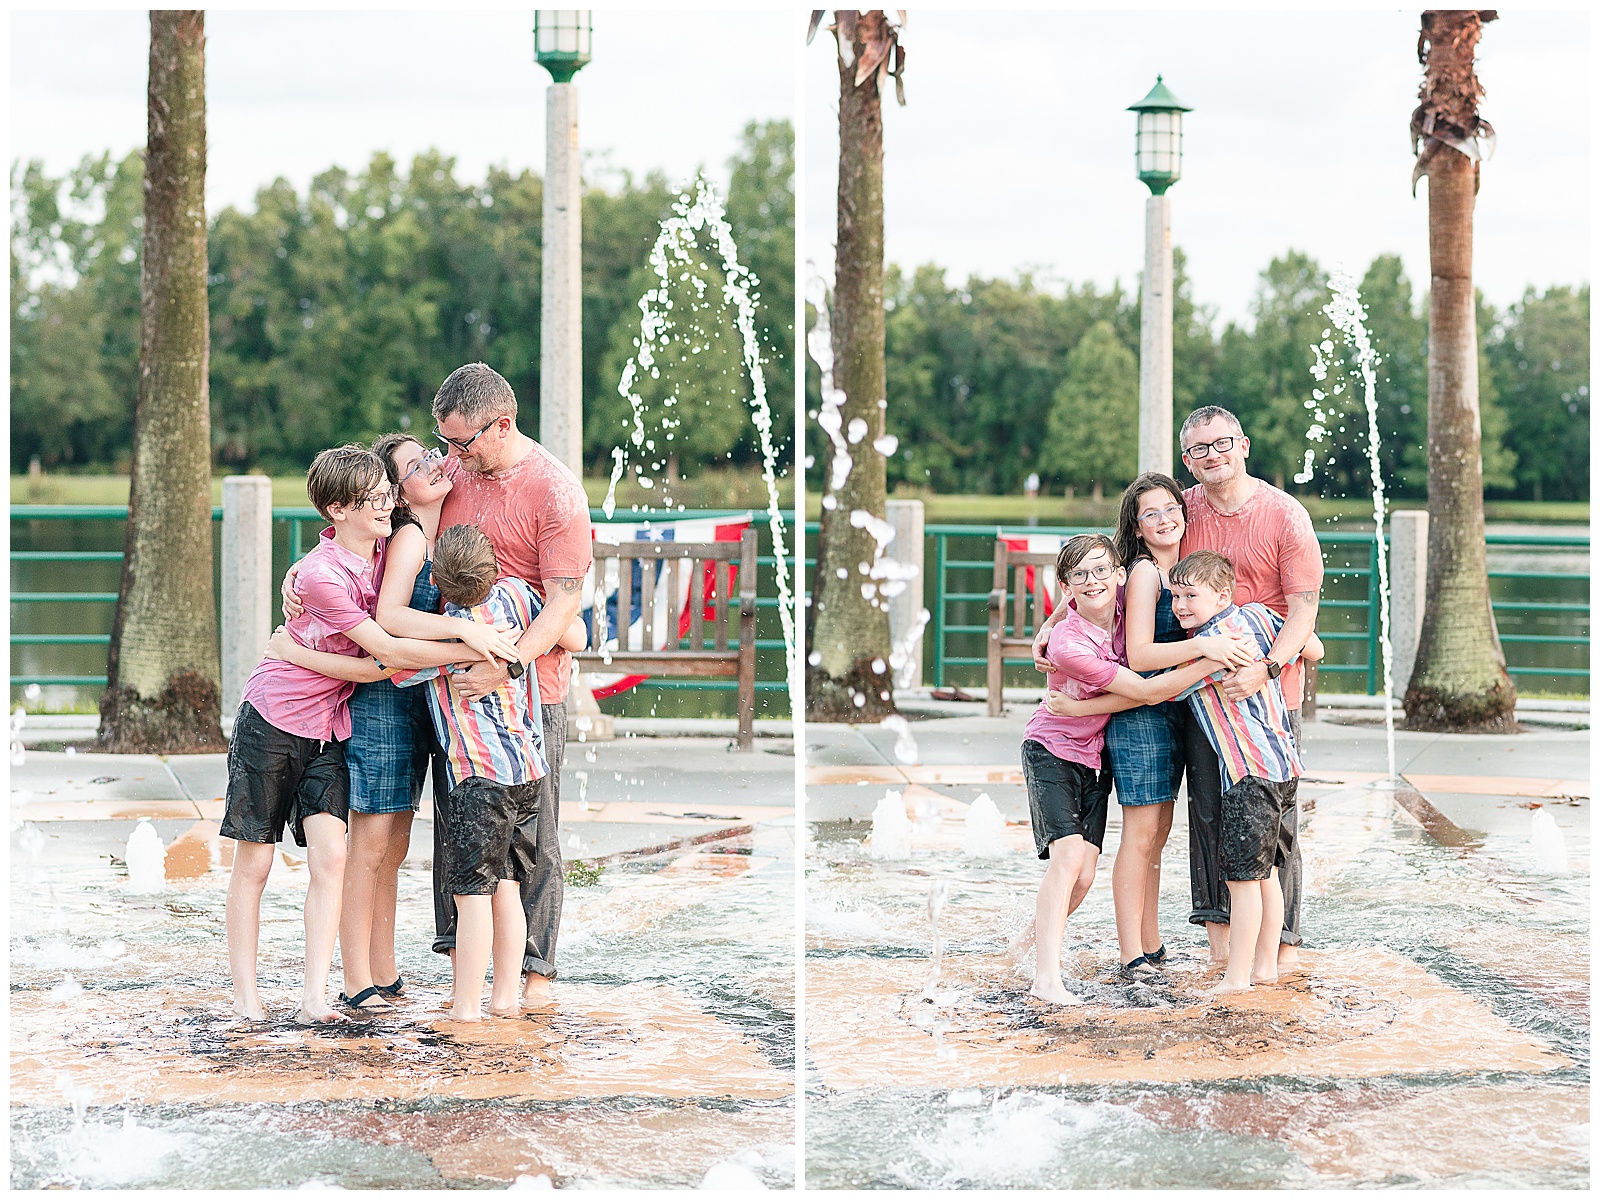 Family playing in the fountain during fun family photos in Celebration, FL